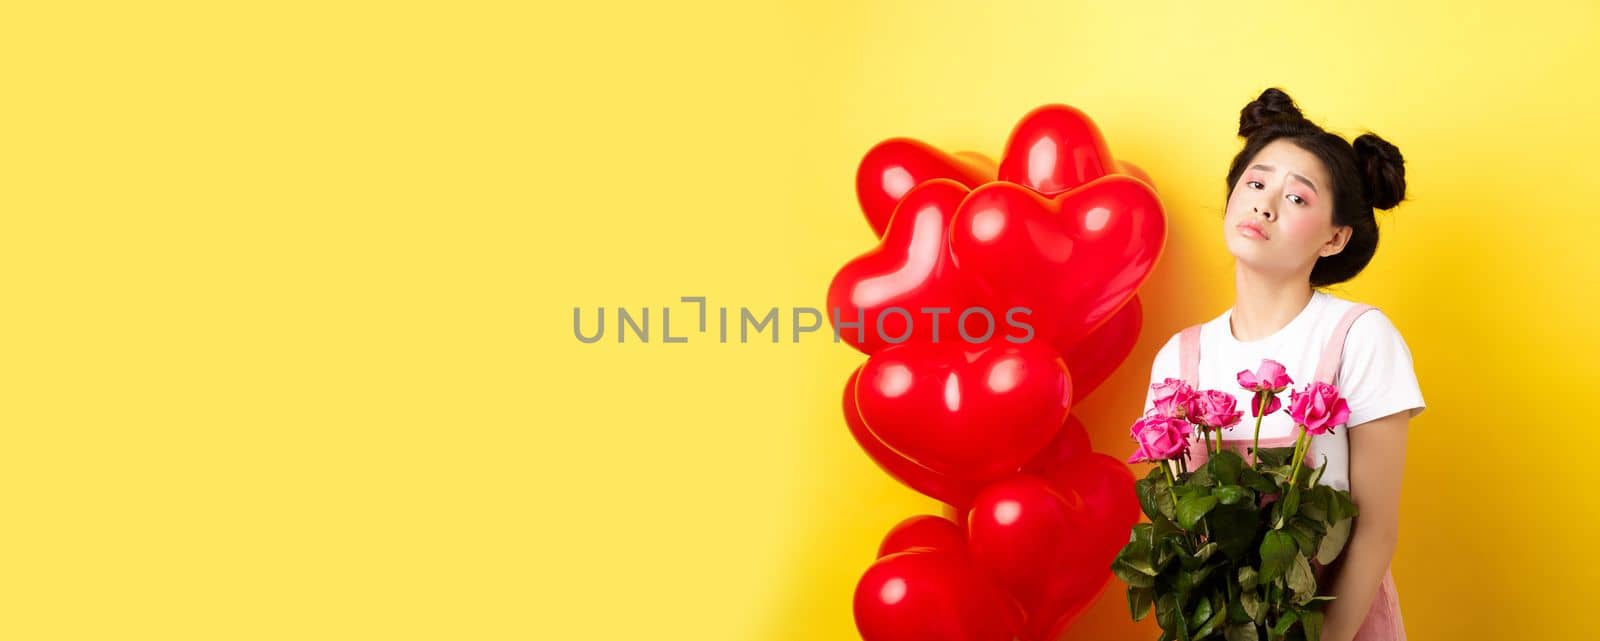 Happy Valentines concept. Sad and gloomy asian woman holding bouquet of roses and feeling upset and lonely on romantic lovers day, standing near red heart balloons, yellow background.